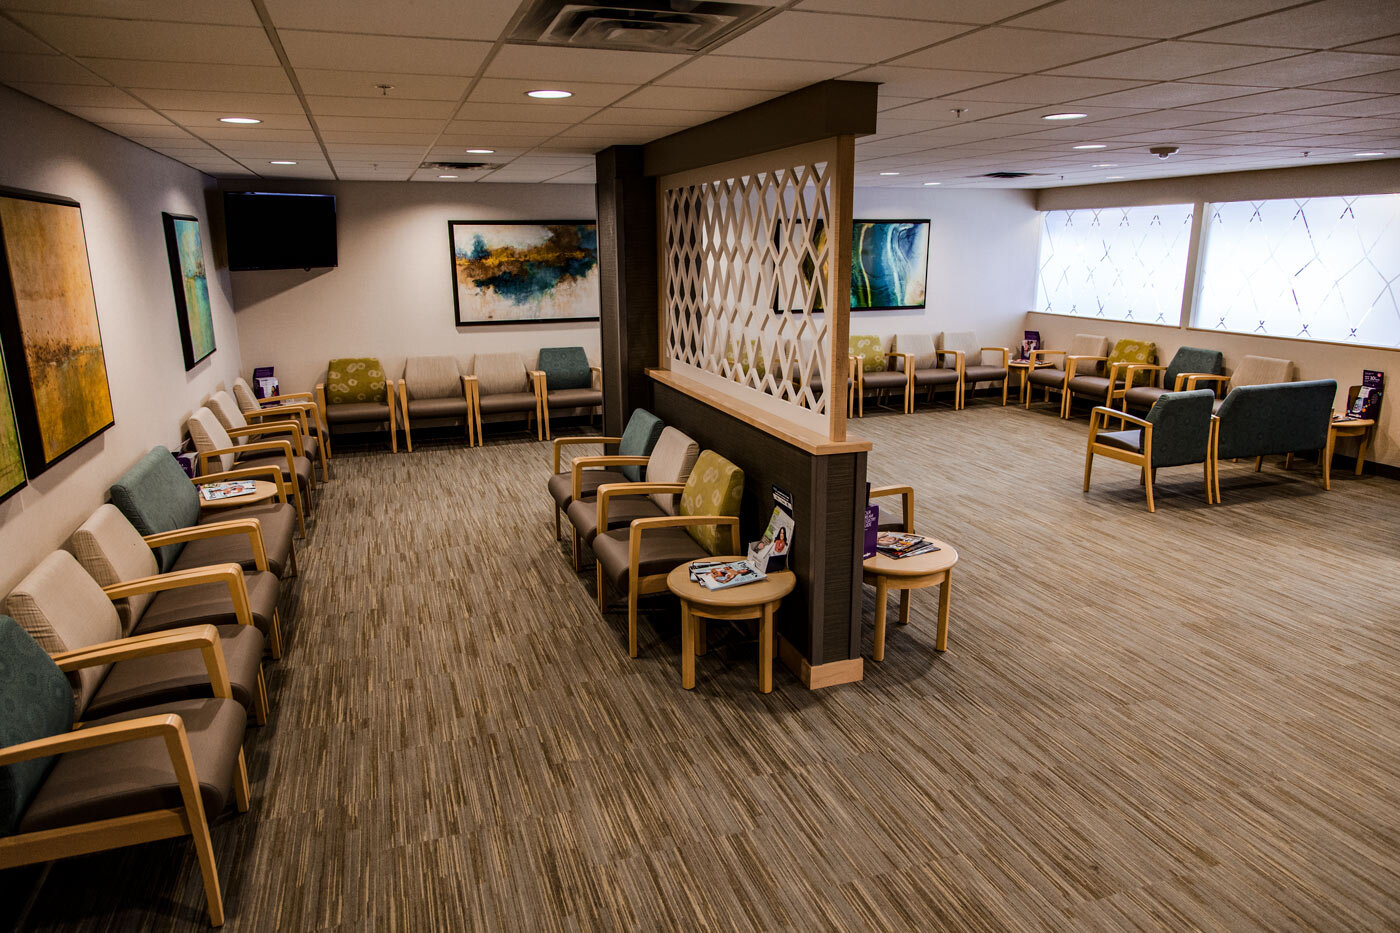 Medical office waiting area